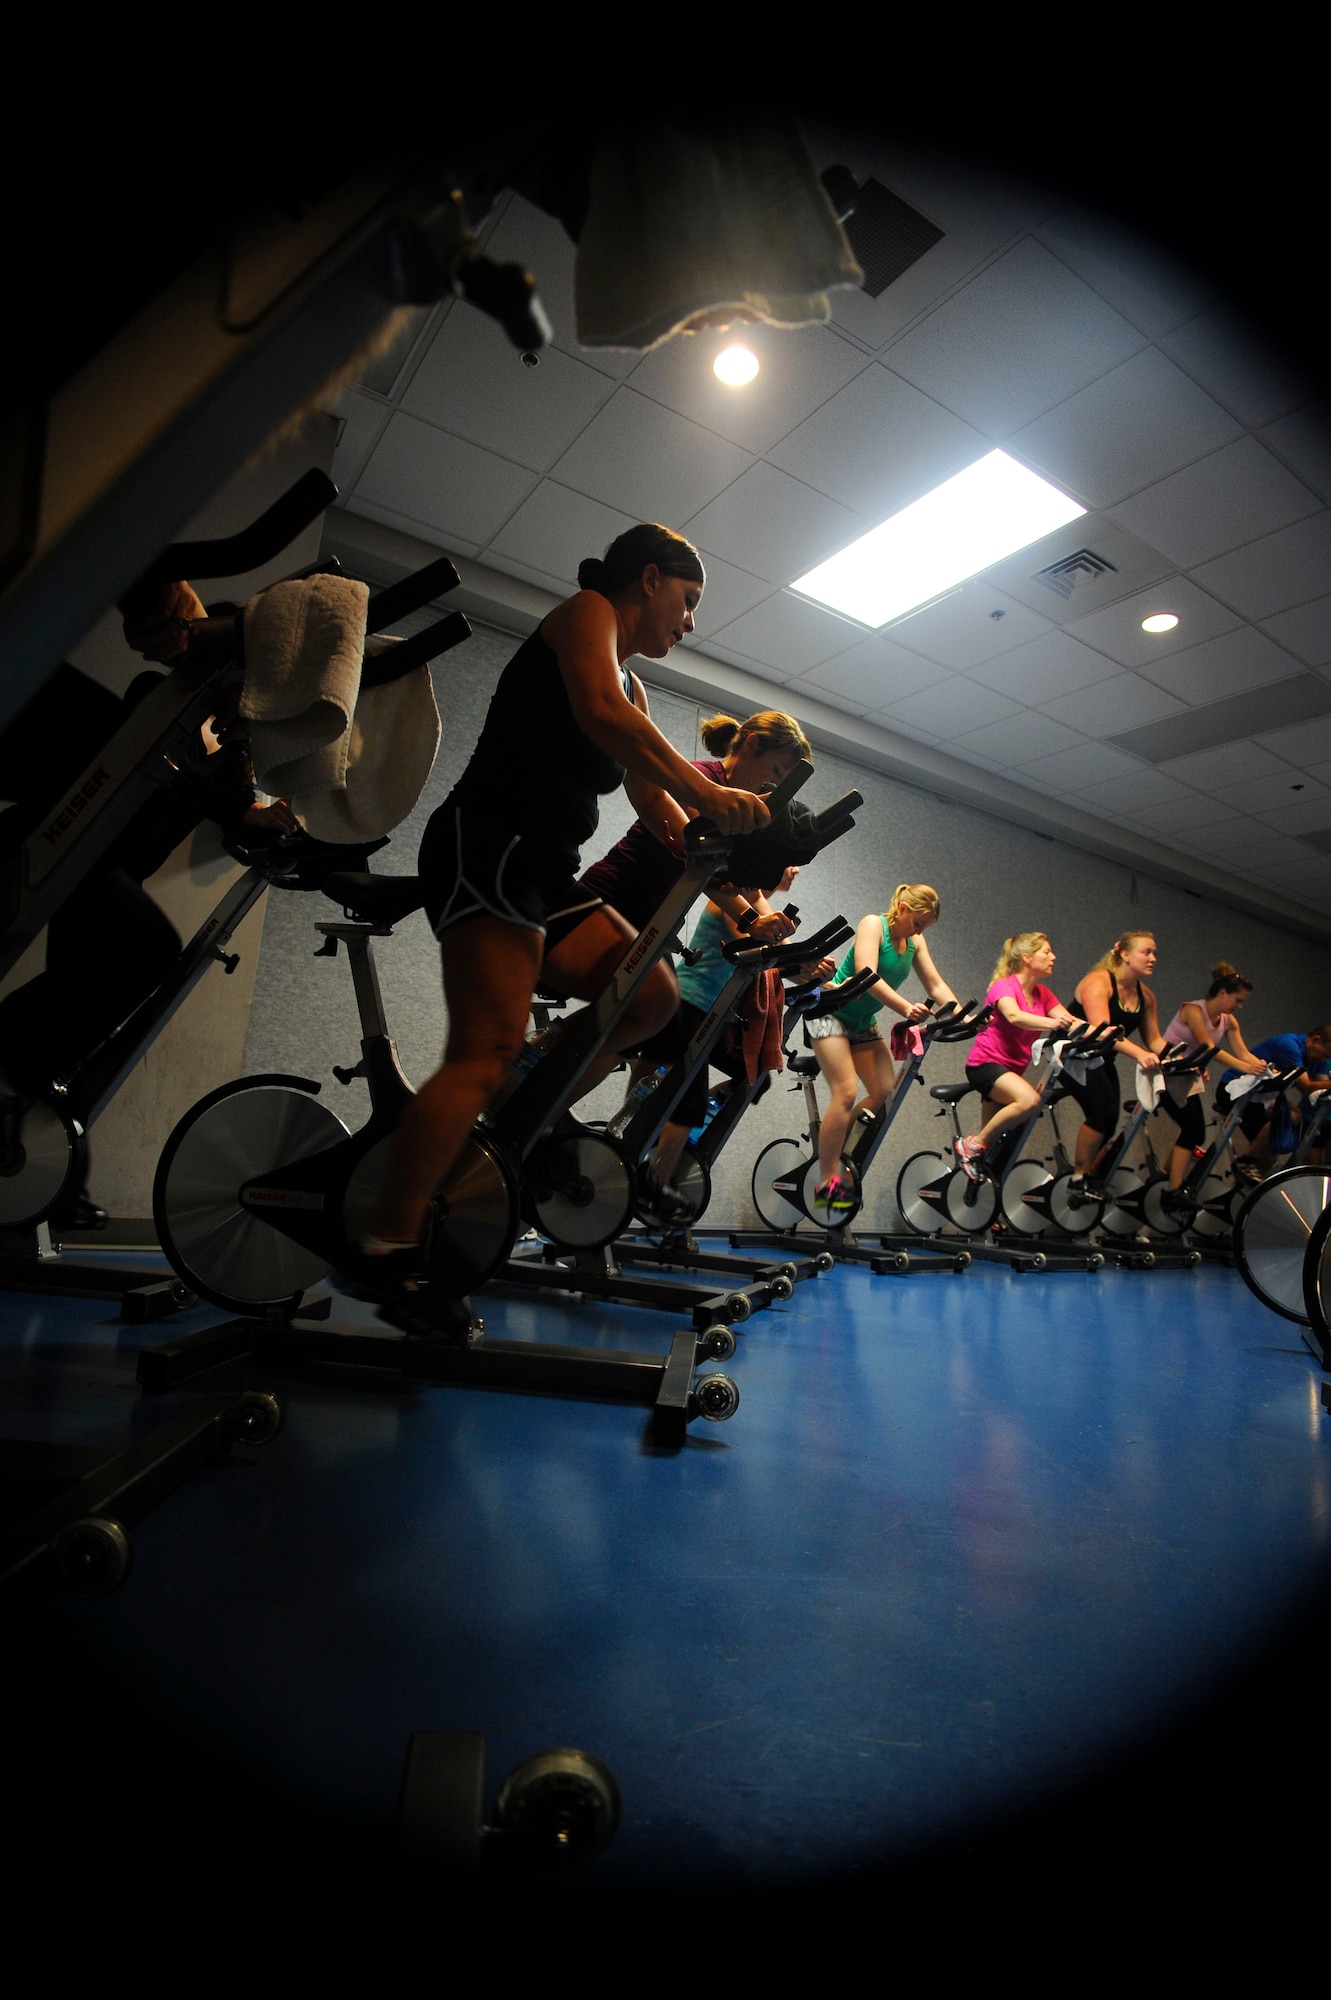 Spin class participants simulate riding through a mountainous range at the Aderholt Gym on Hurlburt Field, Fla., Feb. 20, 2014. The spin bikes at the gym use resistance to mimic flat and mountainous ranges. (U.S. Air Force photo/Airman 1st Class Andrea Posey)